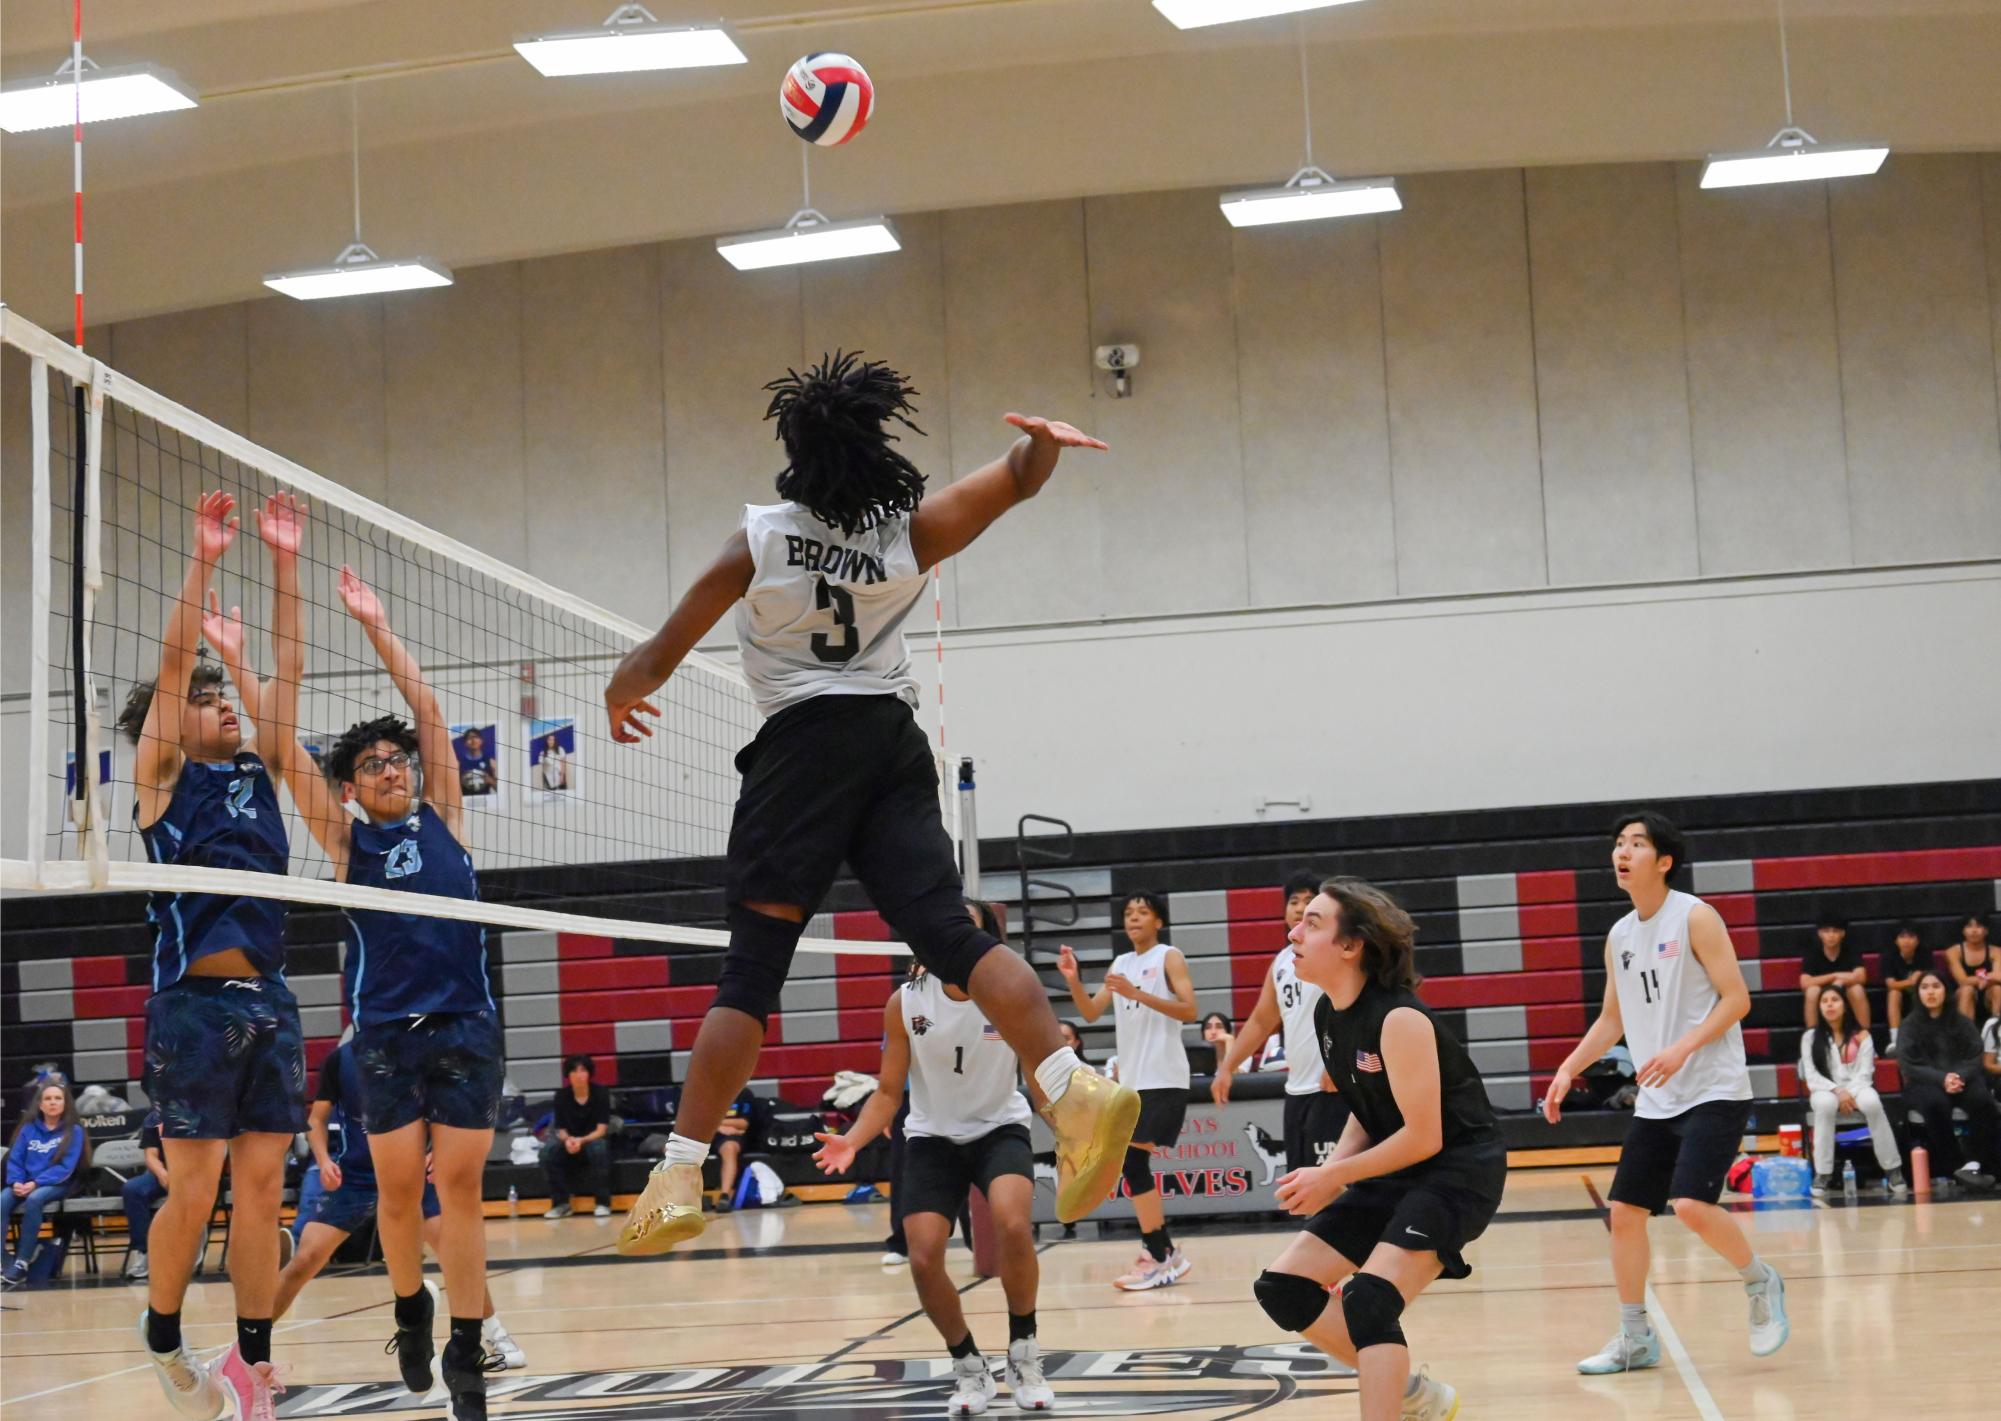 Devin Tanner Brown (#3) spikes the ball over the net for a kill.